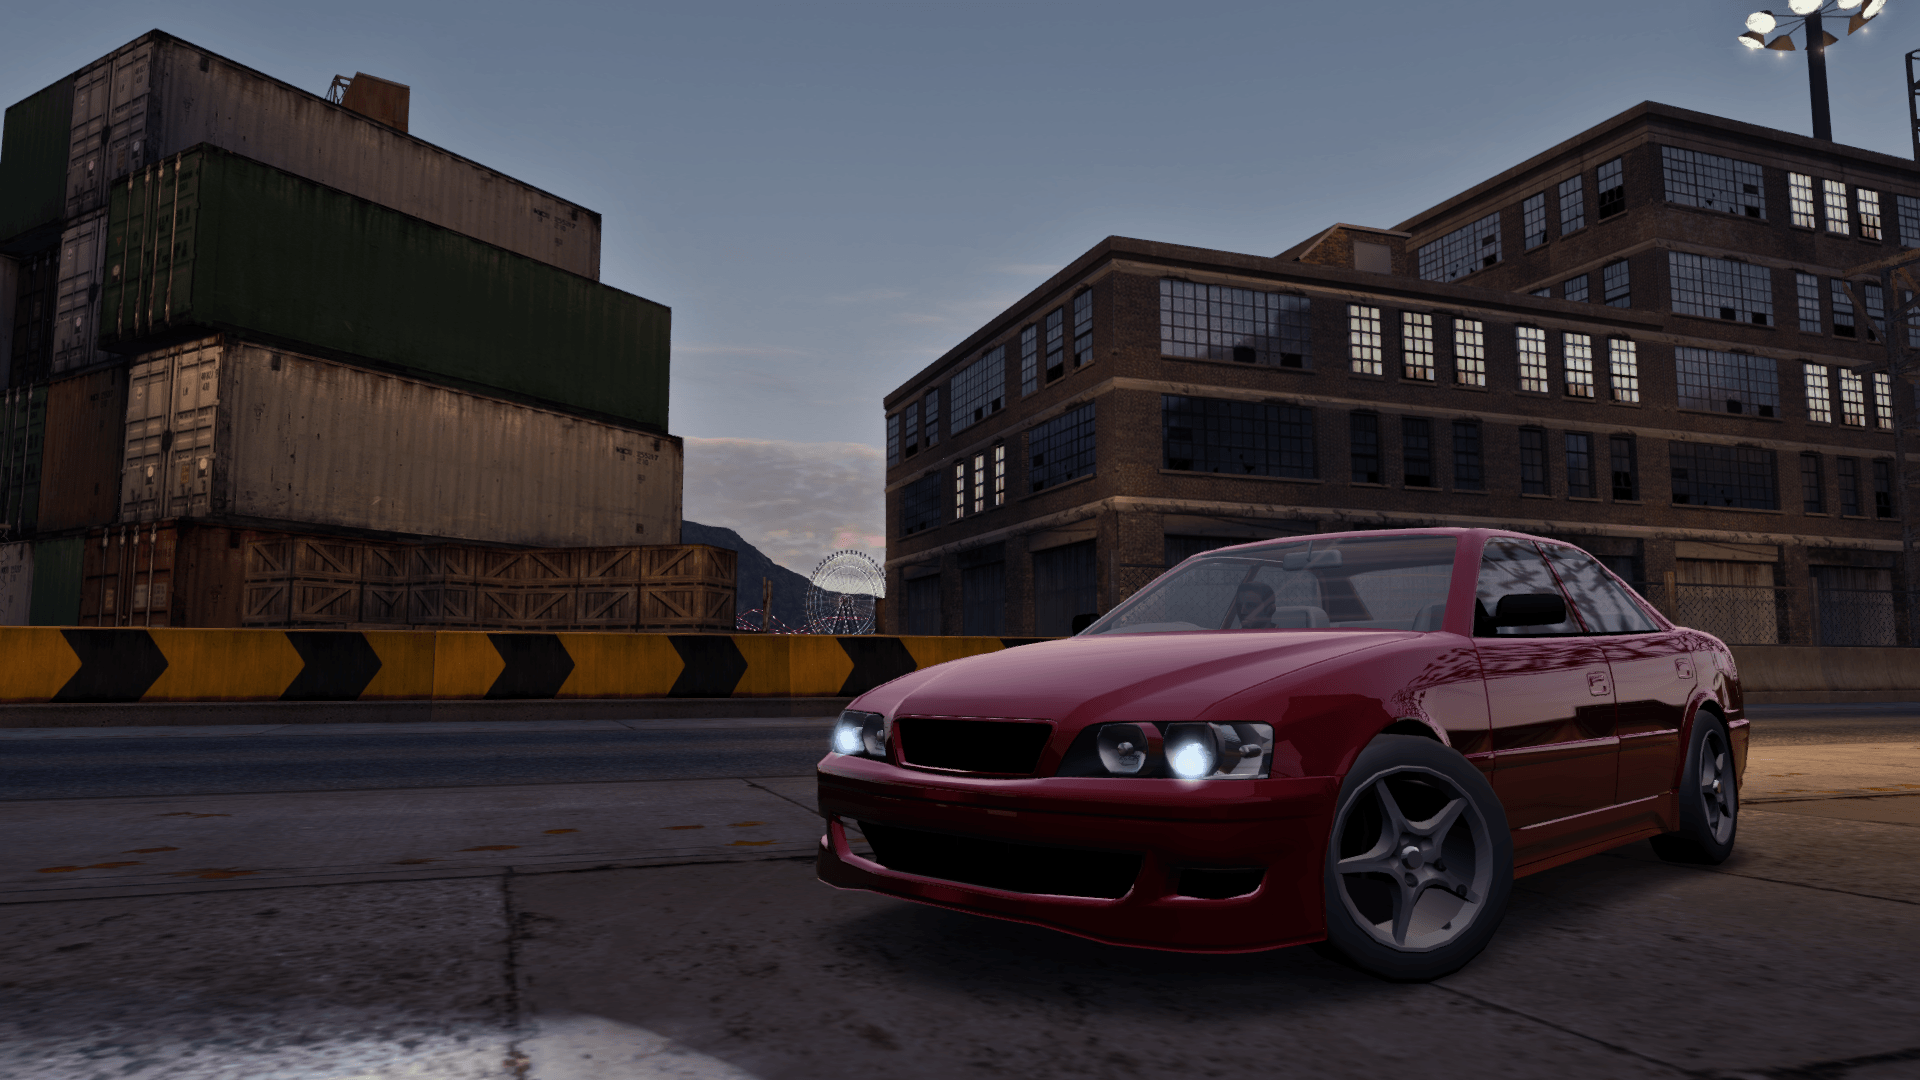 Toyota Chaser JZX100 Tourer V By Osprey22. Need For Speed